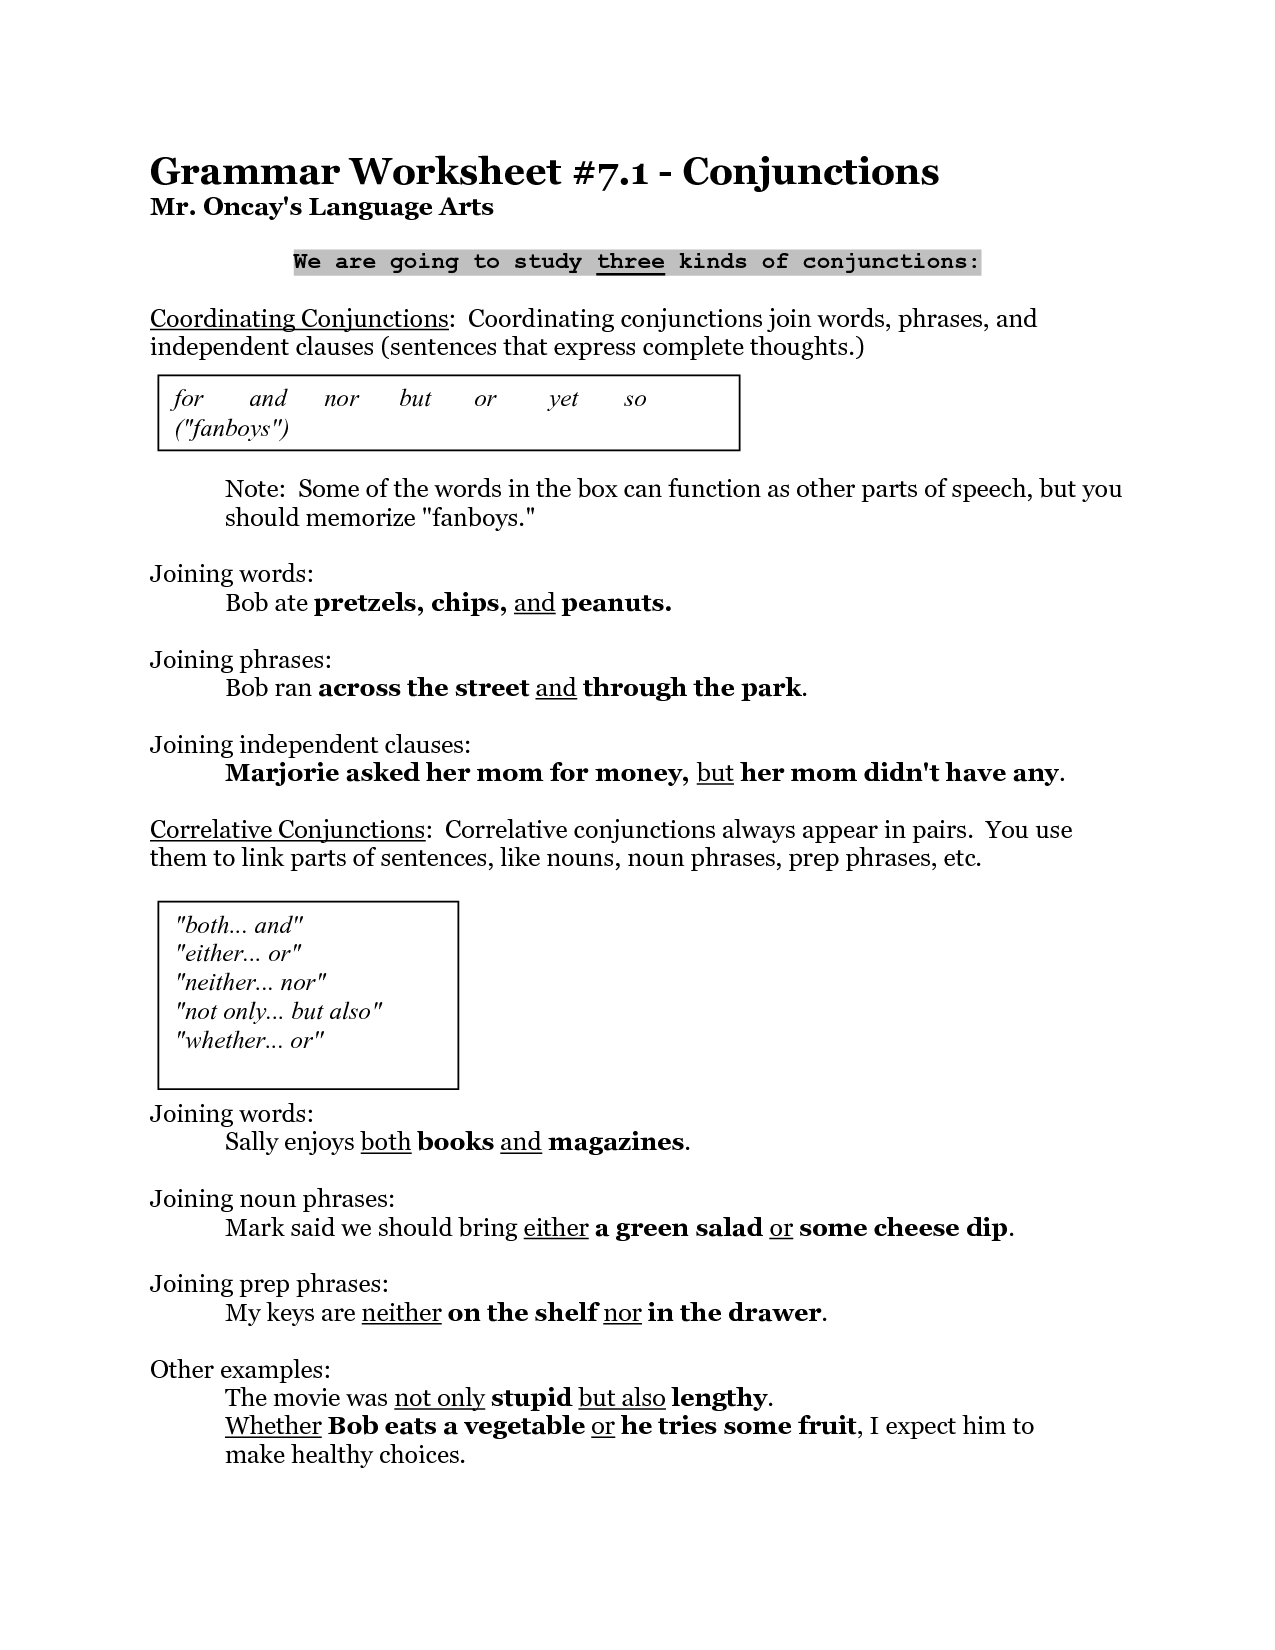 10 Best Images Of Coordinating Conjunctions Worksheets Coordinating And Subordinating